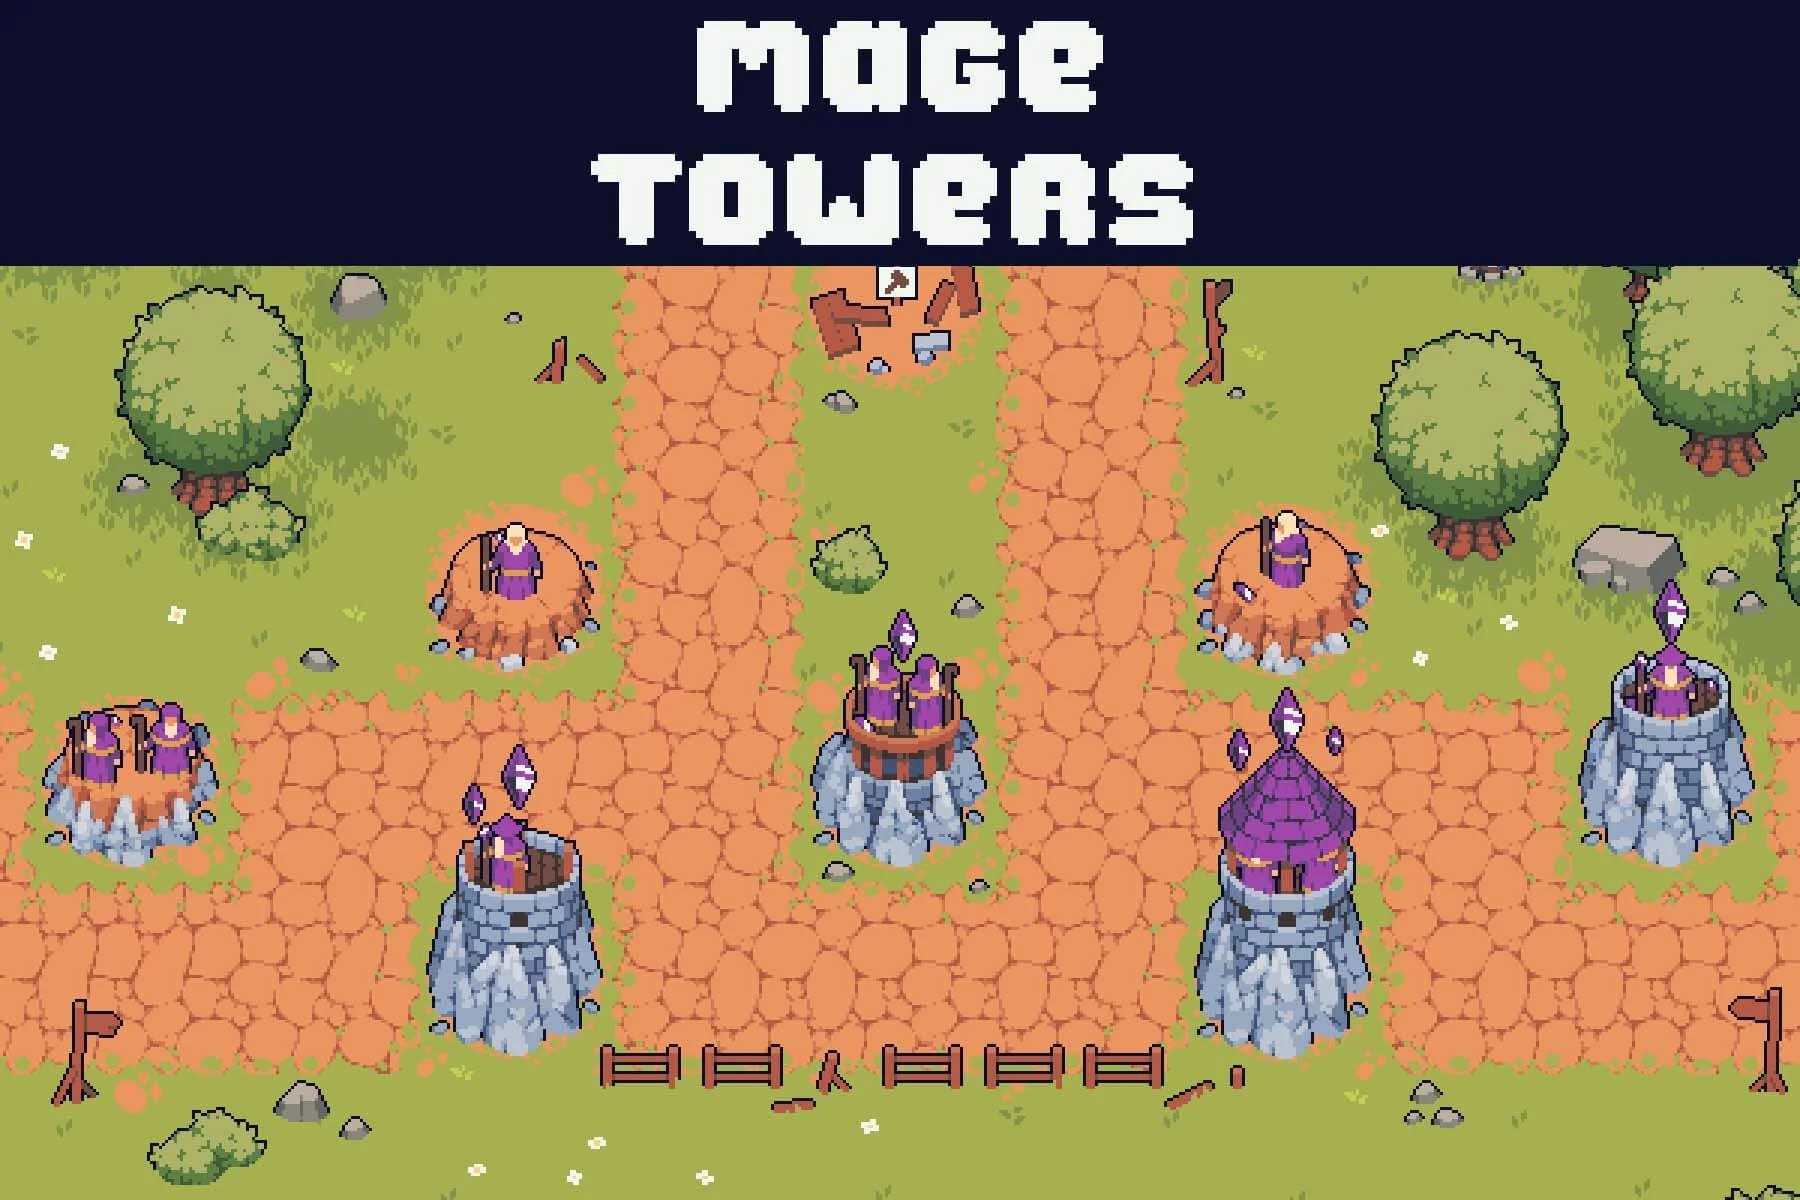 Tower Defence Towers- My Creations